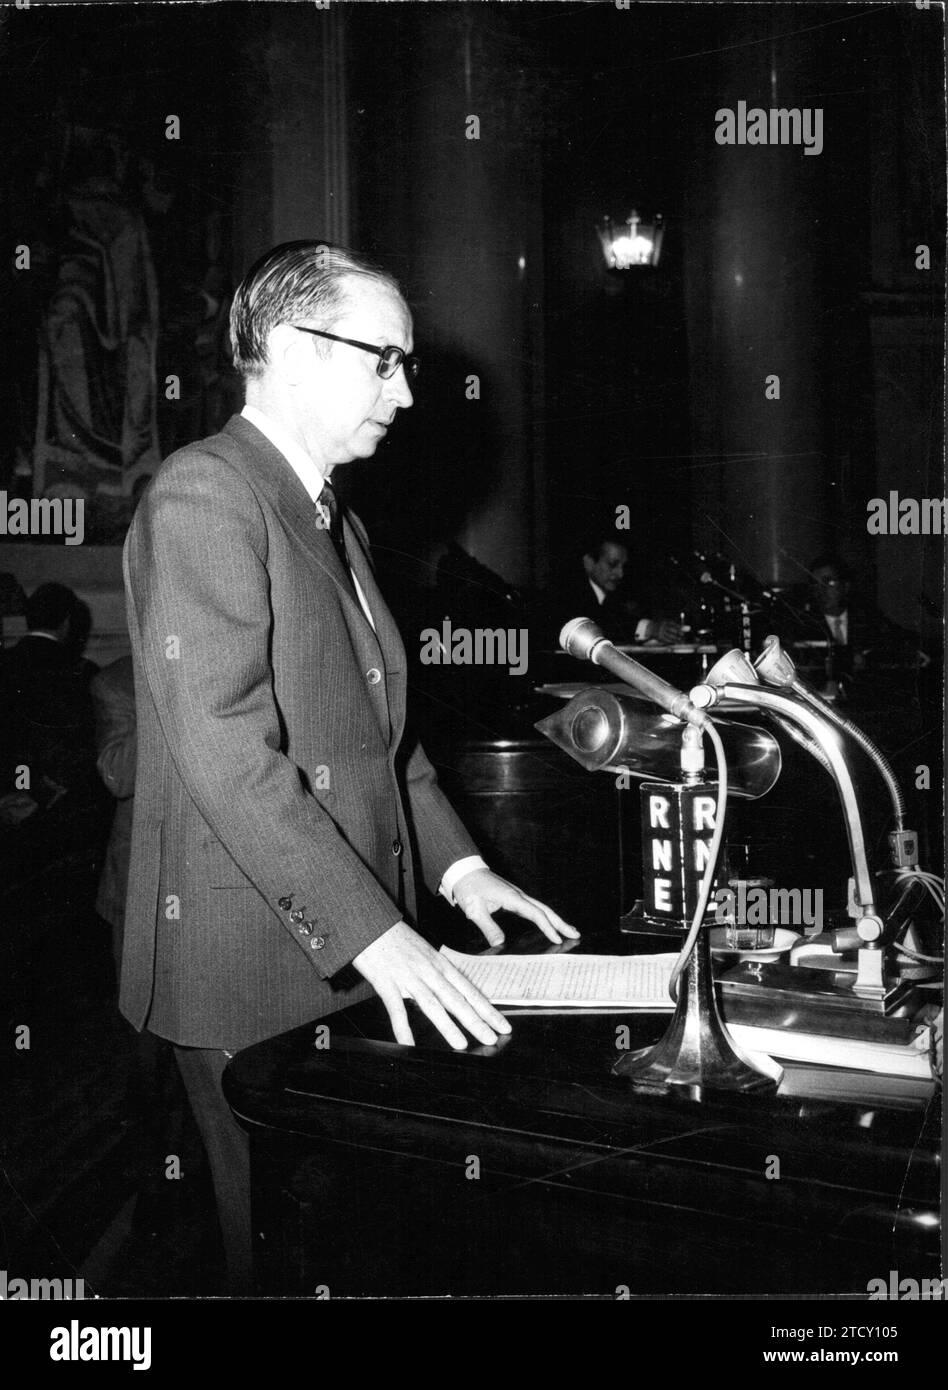 12/14/1969. José Antonio Samaranch during his intervention as speaker during the Plenary session of the national council corresponding to the third Quarter. The draft structure of the general secretariat of the Movement was presented. Credit: Album / Archivo ABC / Teodoro Naranjo Domínguez Stock Photo